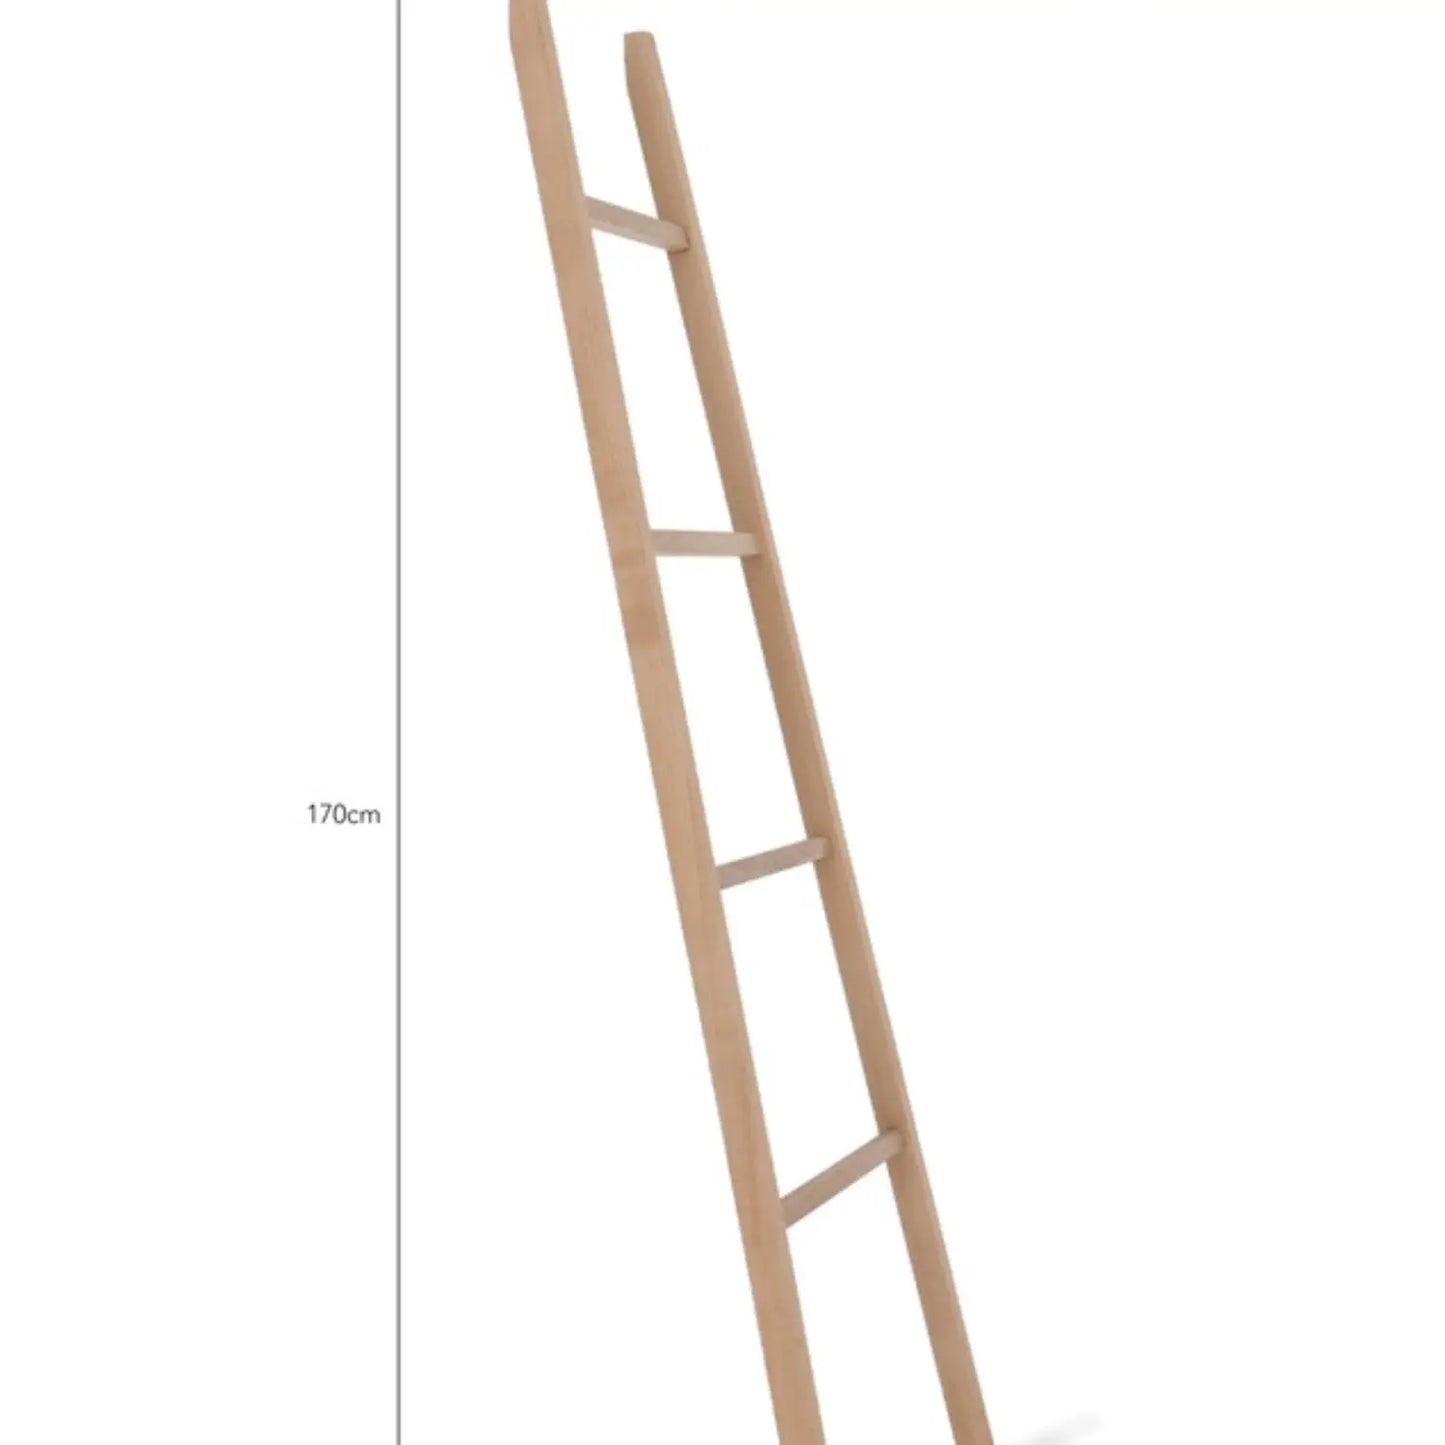 southbourne-towel-ladder-by-garden-trading-beech